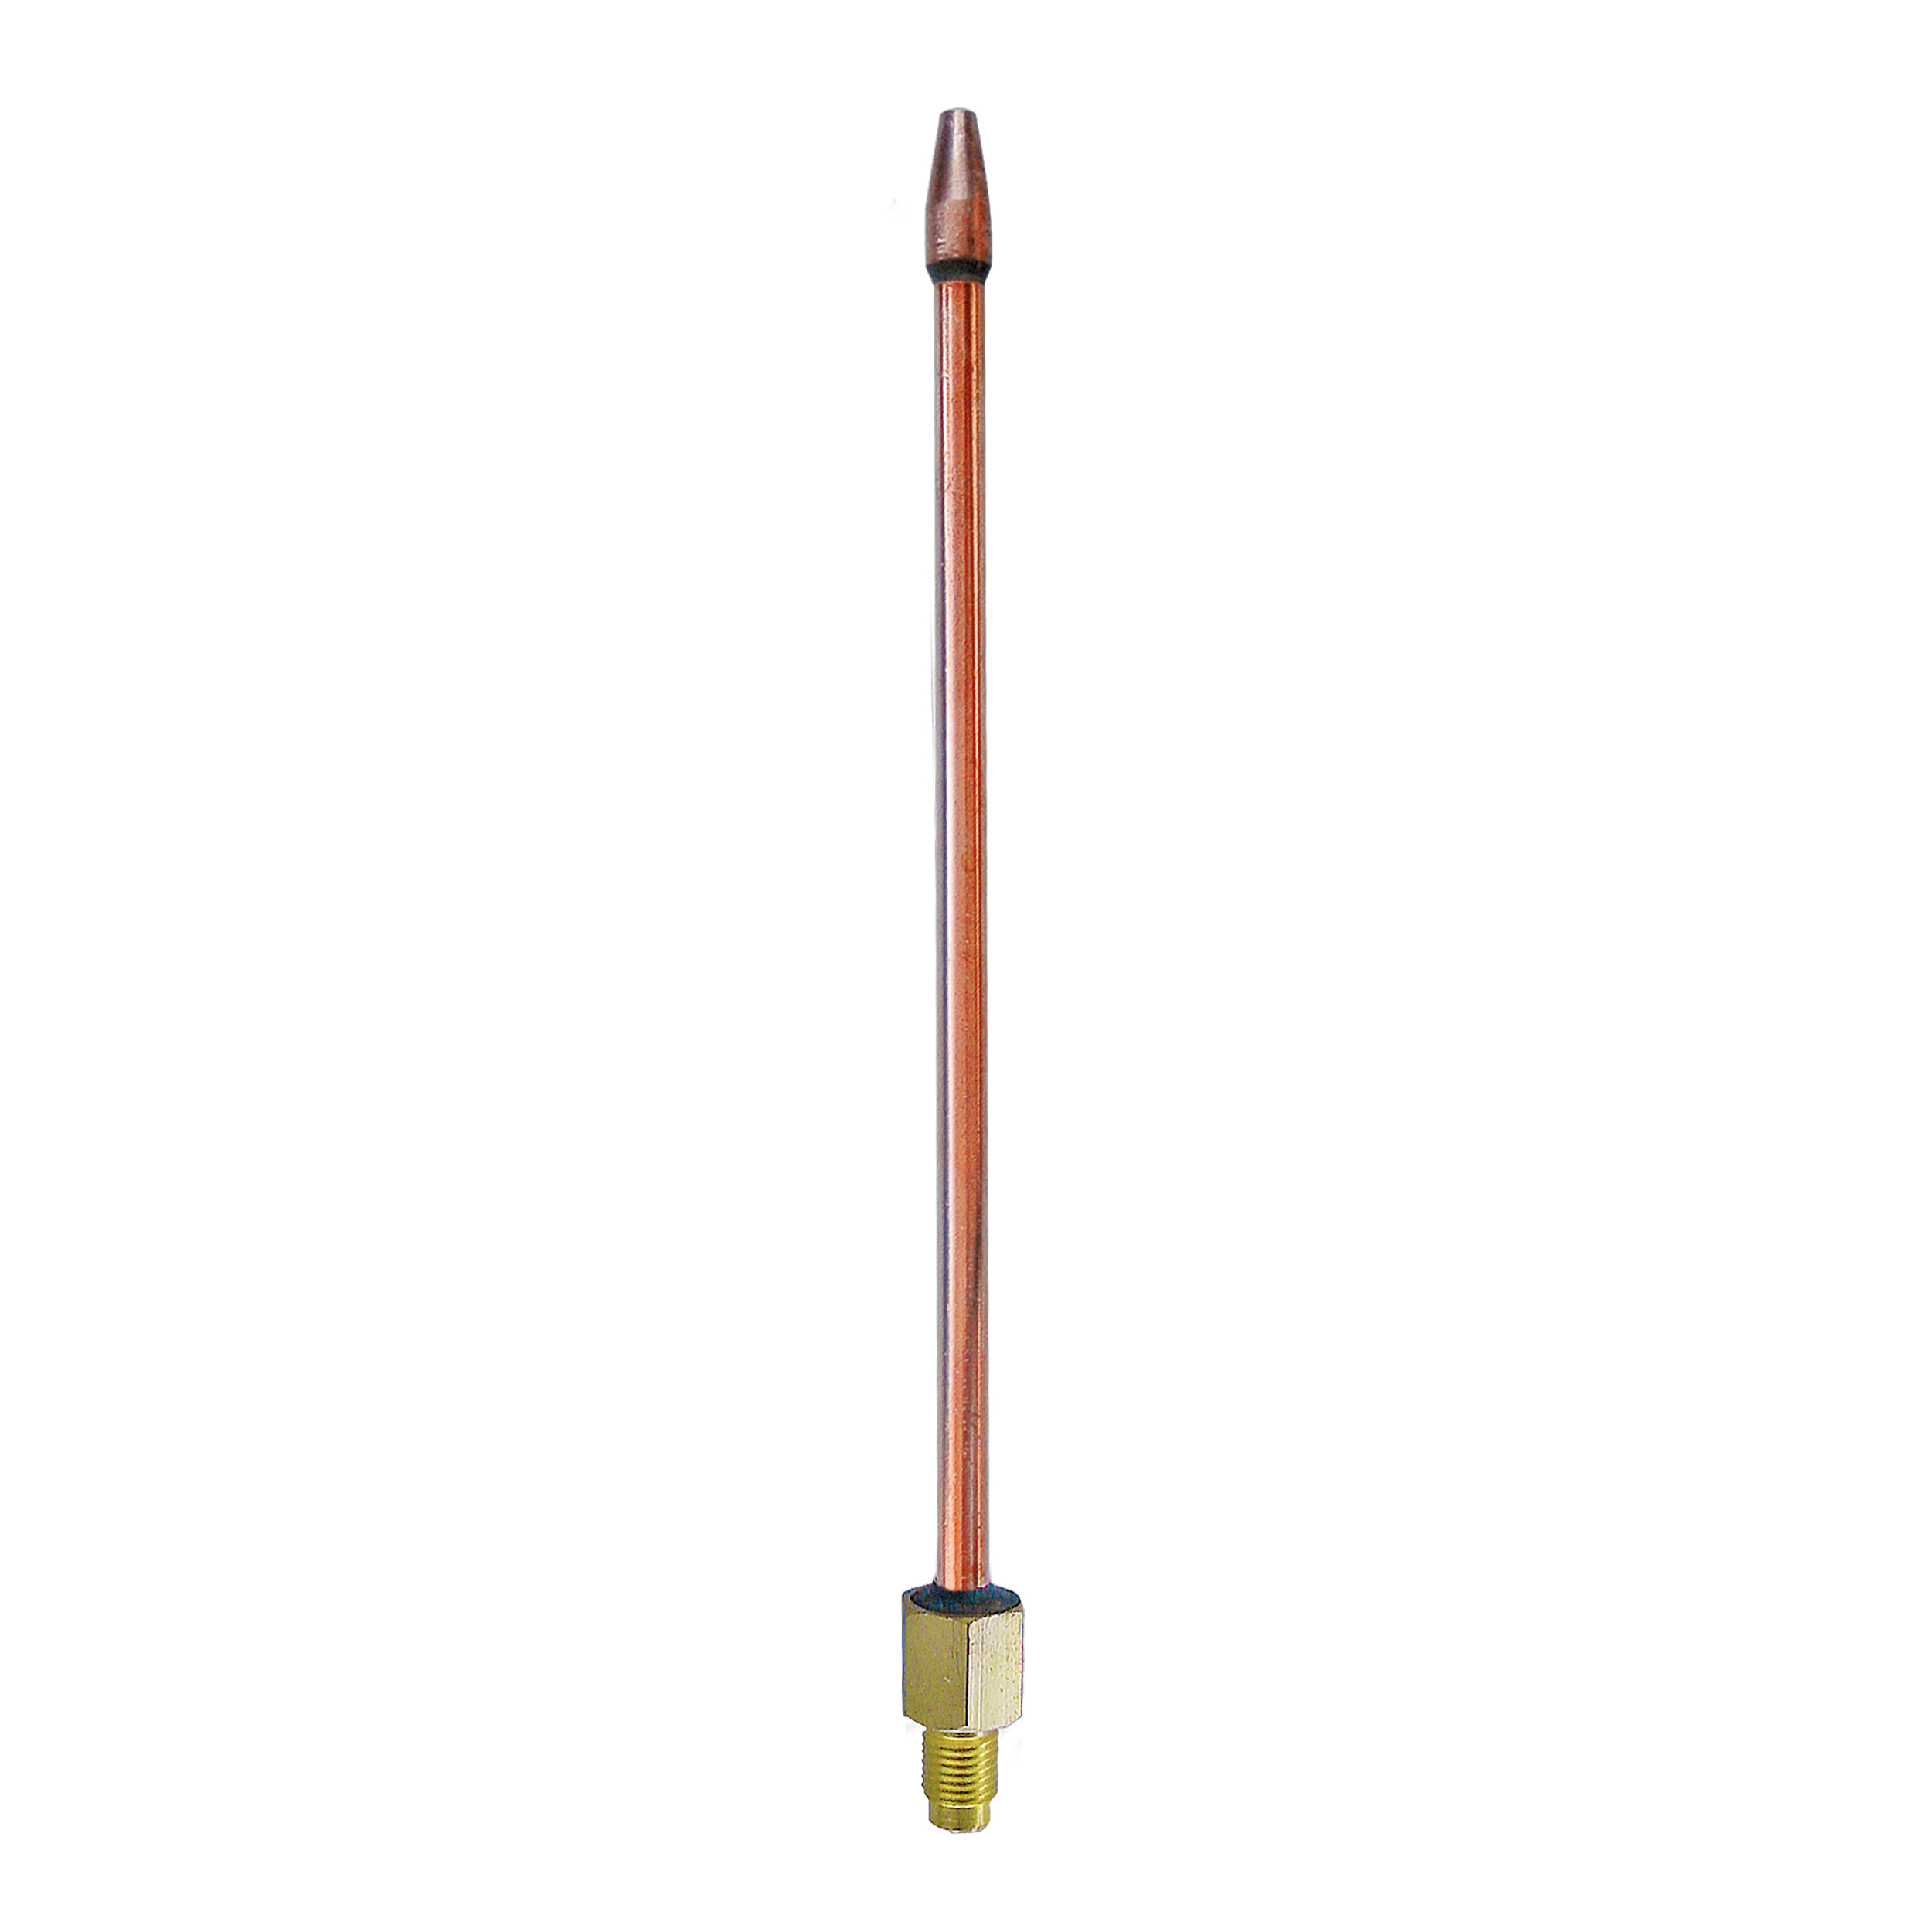 Frontpart (mixing tube), straight, f. 20 mm shank, size 4, nominal range (mm): 4–6, thread: M10 × 1